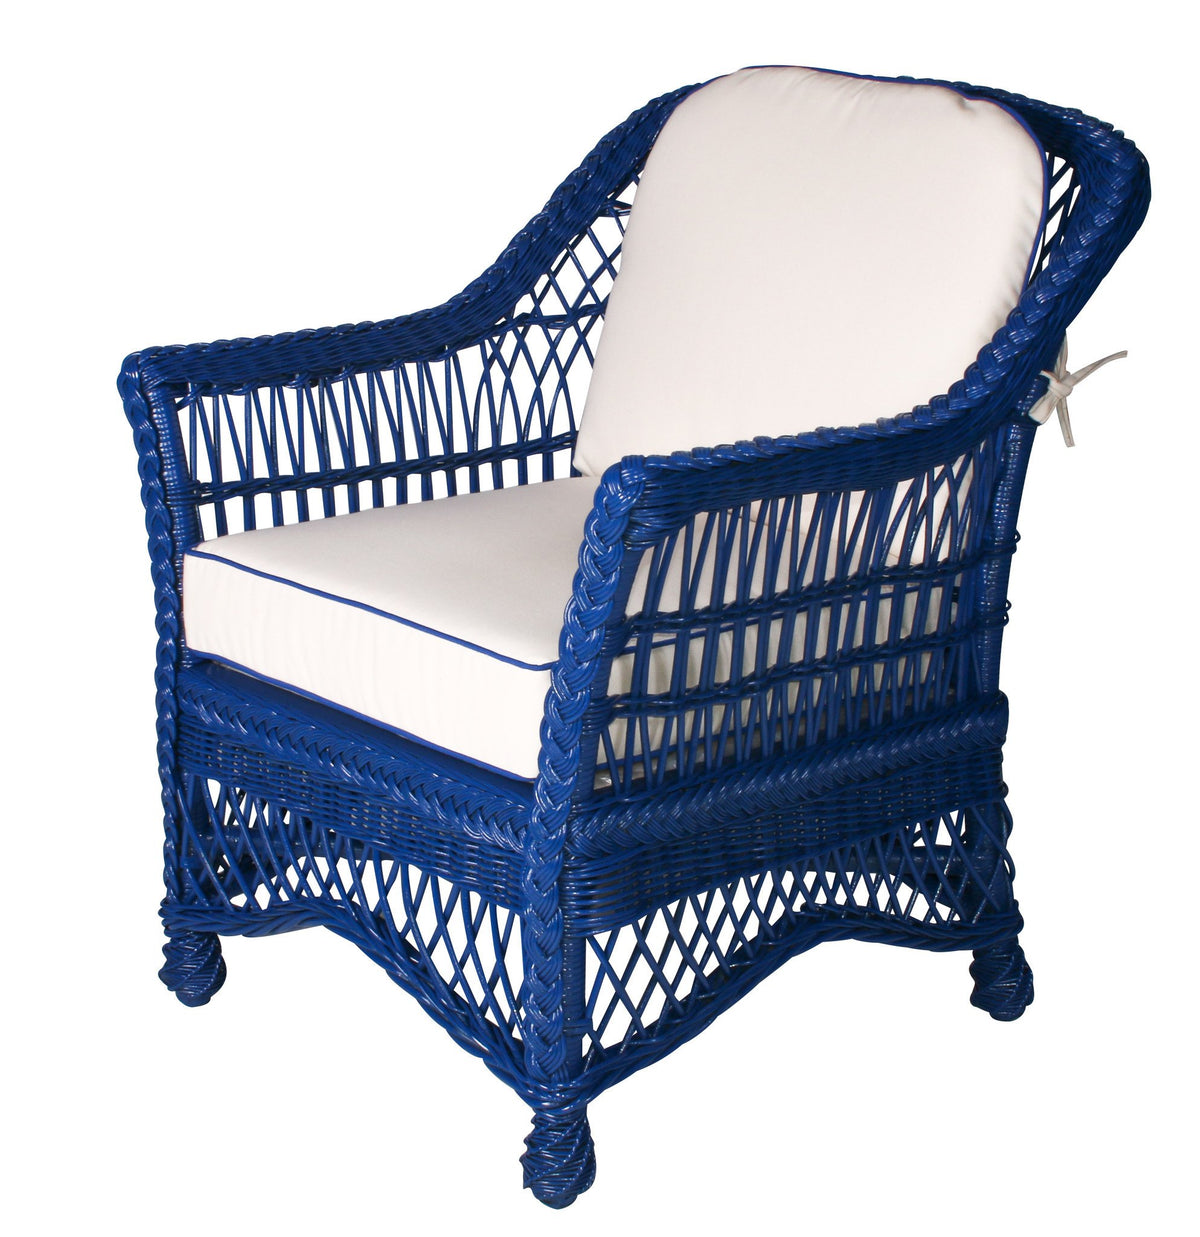 Designer Wicker &amp; Rattan By Tribor Naples Dining Arm Chair by Designer Wicker from Tribor Dining Chair - Rattan Imports